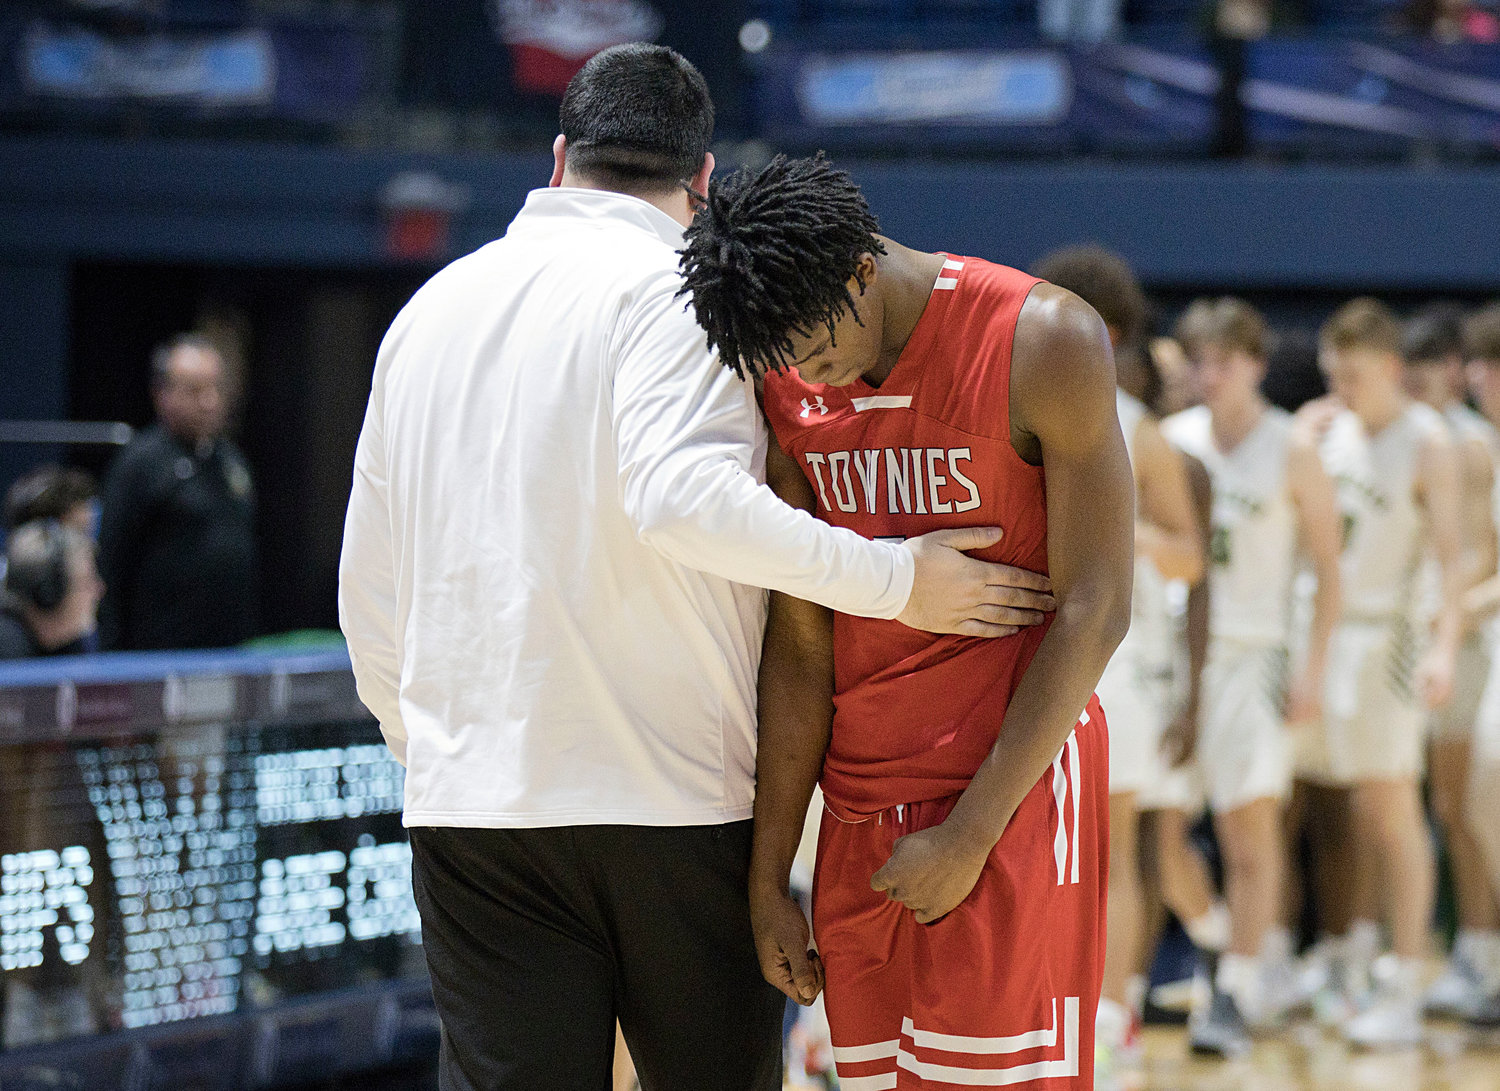 EPHS assistant coach Patrick Marchand consoles Kenaz Ochgwu at the end of the Townies' state semifinal loss to Hendricken Saturday, March 11.